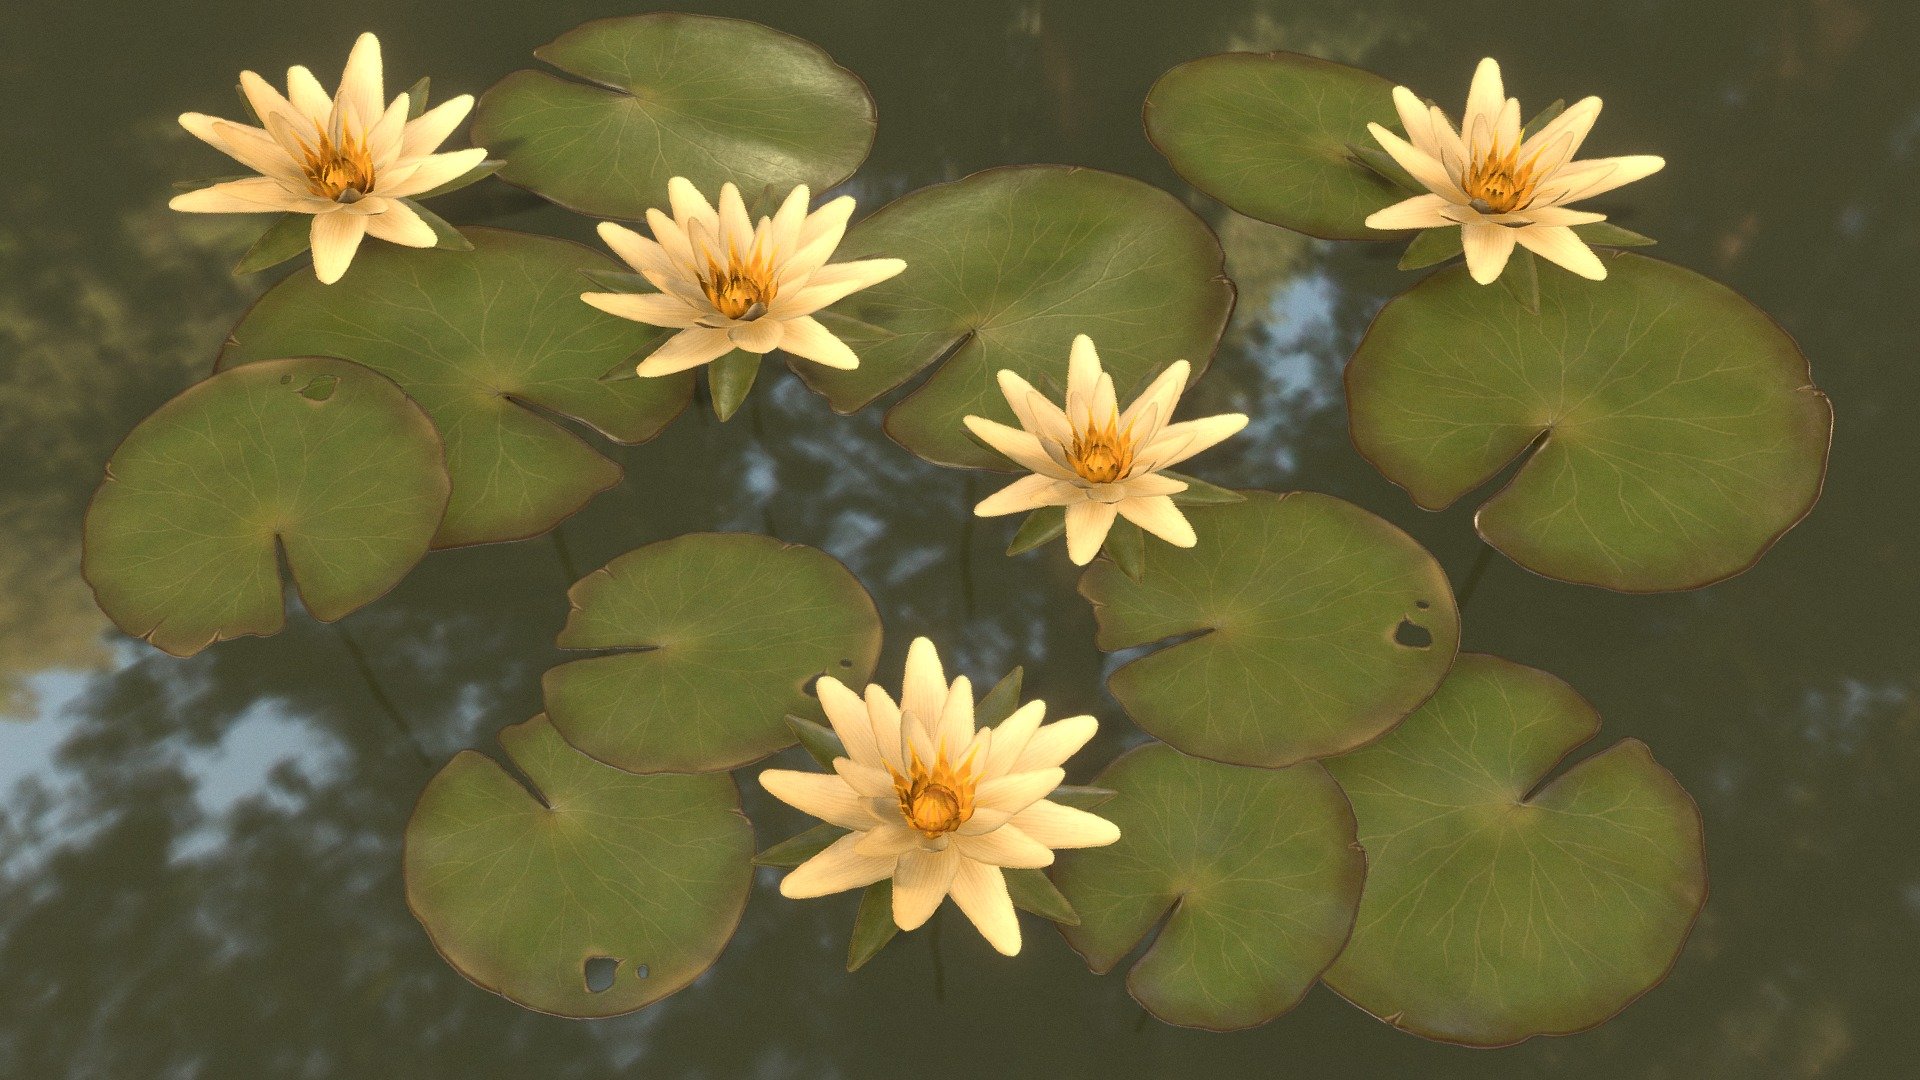 Water Lilies it's a lowpoly game ready set of models with unwrapped UVs and PBR textures.

This asset includes 3 separate objects: flower and 2 leaves.

Normal map was baked from a high poly models.

UVs: channel 1: overlapping; channel 2: non-overlapping (for baking lightmaps)

Formats: FBX, Obj. Marmoset Toolbag scene 3.08 (.tbscene) Textures format: TGA. Textures resolution: 2048x2048px. 

Textures set includes:




Metal_Roughness: BaseColor, Roughness, Metallic, Normal, Height, AO.

Unity 5 (Standart Metallic): AlbedoTransparency, AO, Normal, MetallicSmoothness

Unreal Engine 4: BaseColor, OcclusionRoughnessMetallic, Normal.

Water Lily (Leaf) - 37 polygons, 46 vertices
Water Lily (Flower) - 940 polygons, 1553 vertices 



Artstation: https://www.artstation.com/tatianagladkaya

Instagram: https://www.instagram.com/t.gladkaya_ - Water Lilies - 3D model by Tatiana Gladkaya (@tatiana_gladkaya) 3d model